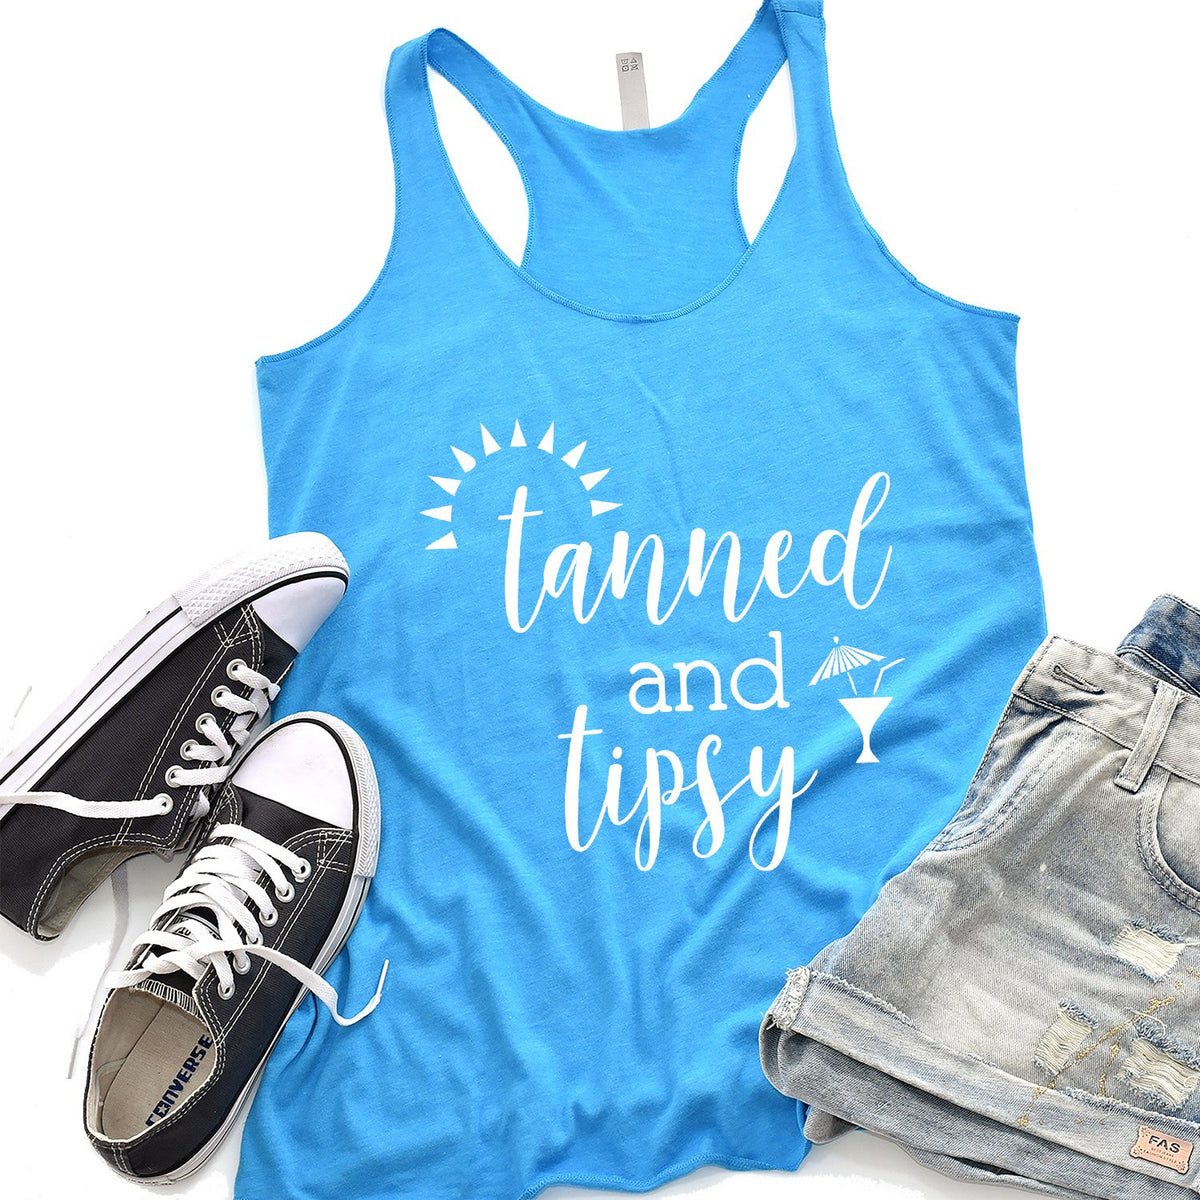 Tanned and Tipsy - Tank Top Racerback